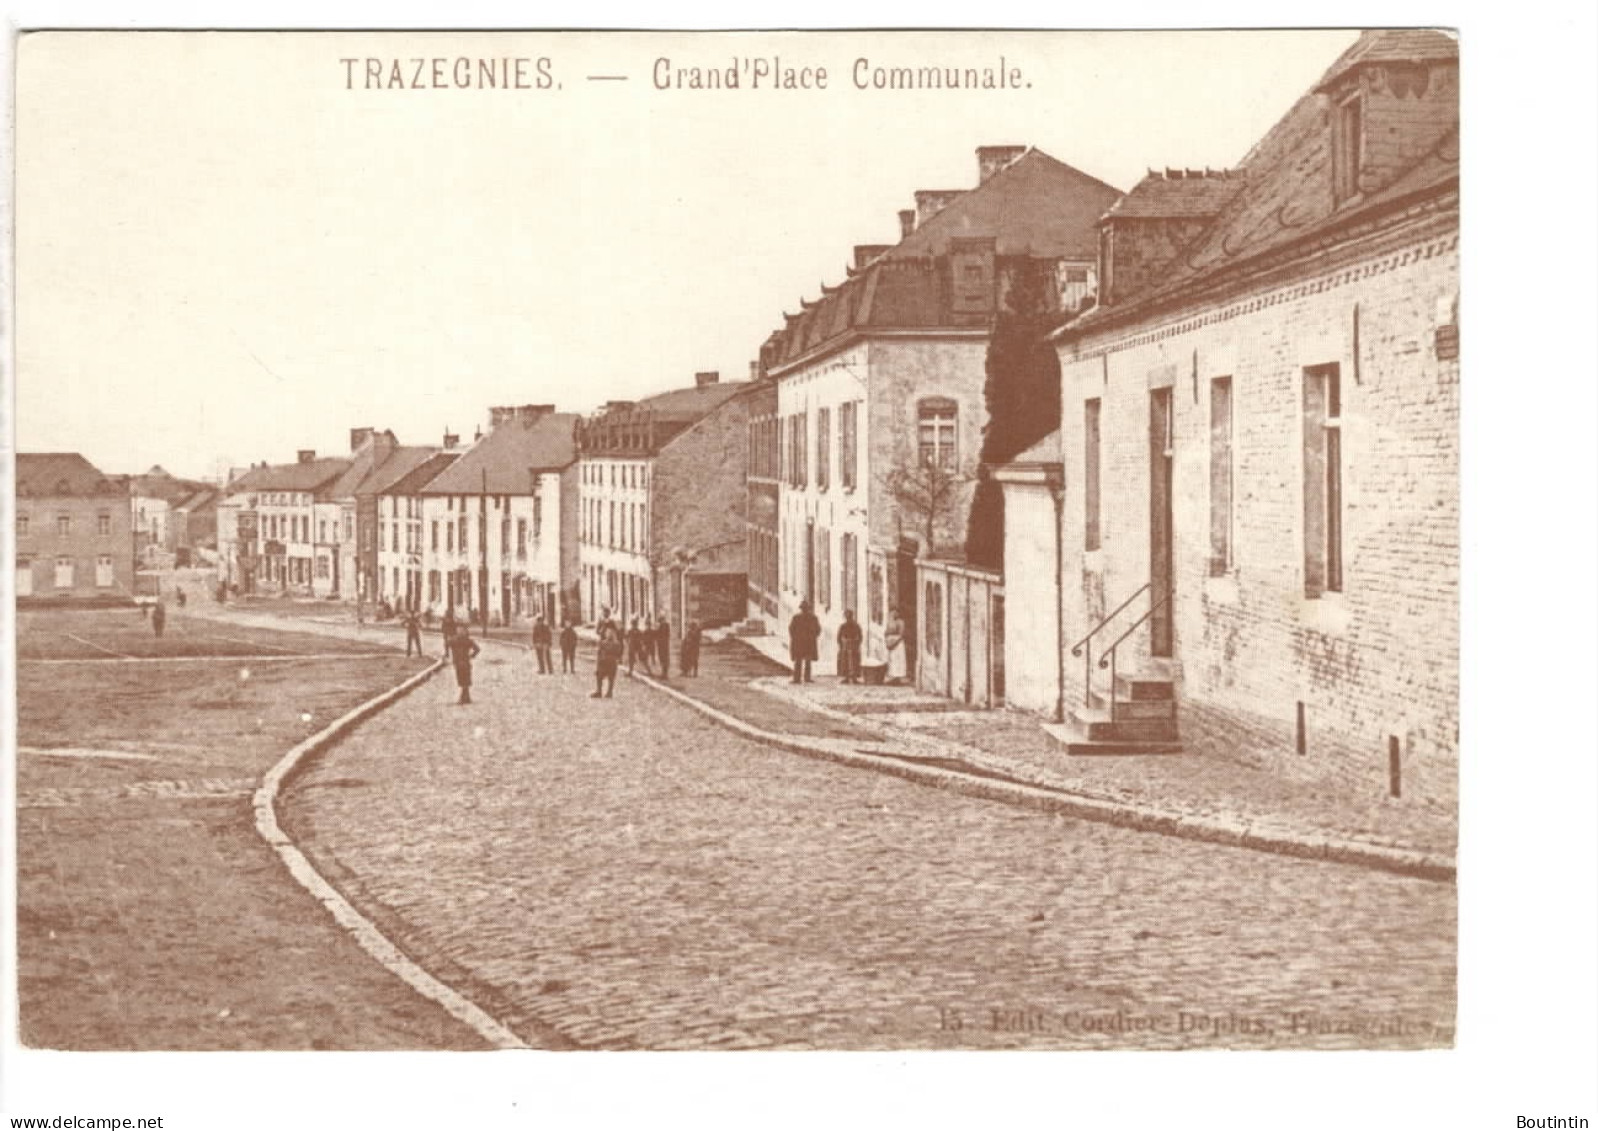 Trazegnies Grand'Place Communale - Reproduction ADEPS - Courcelles